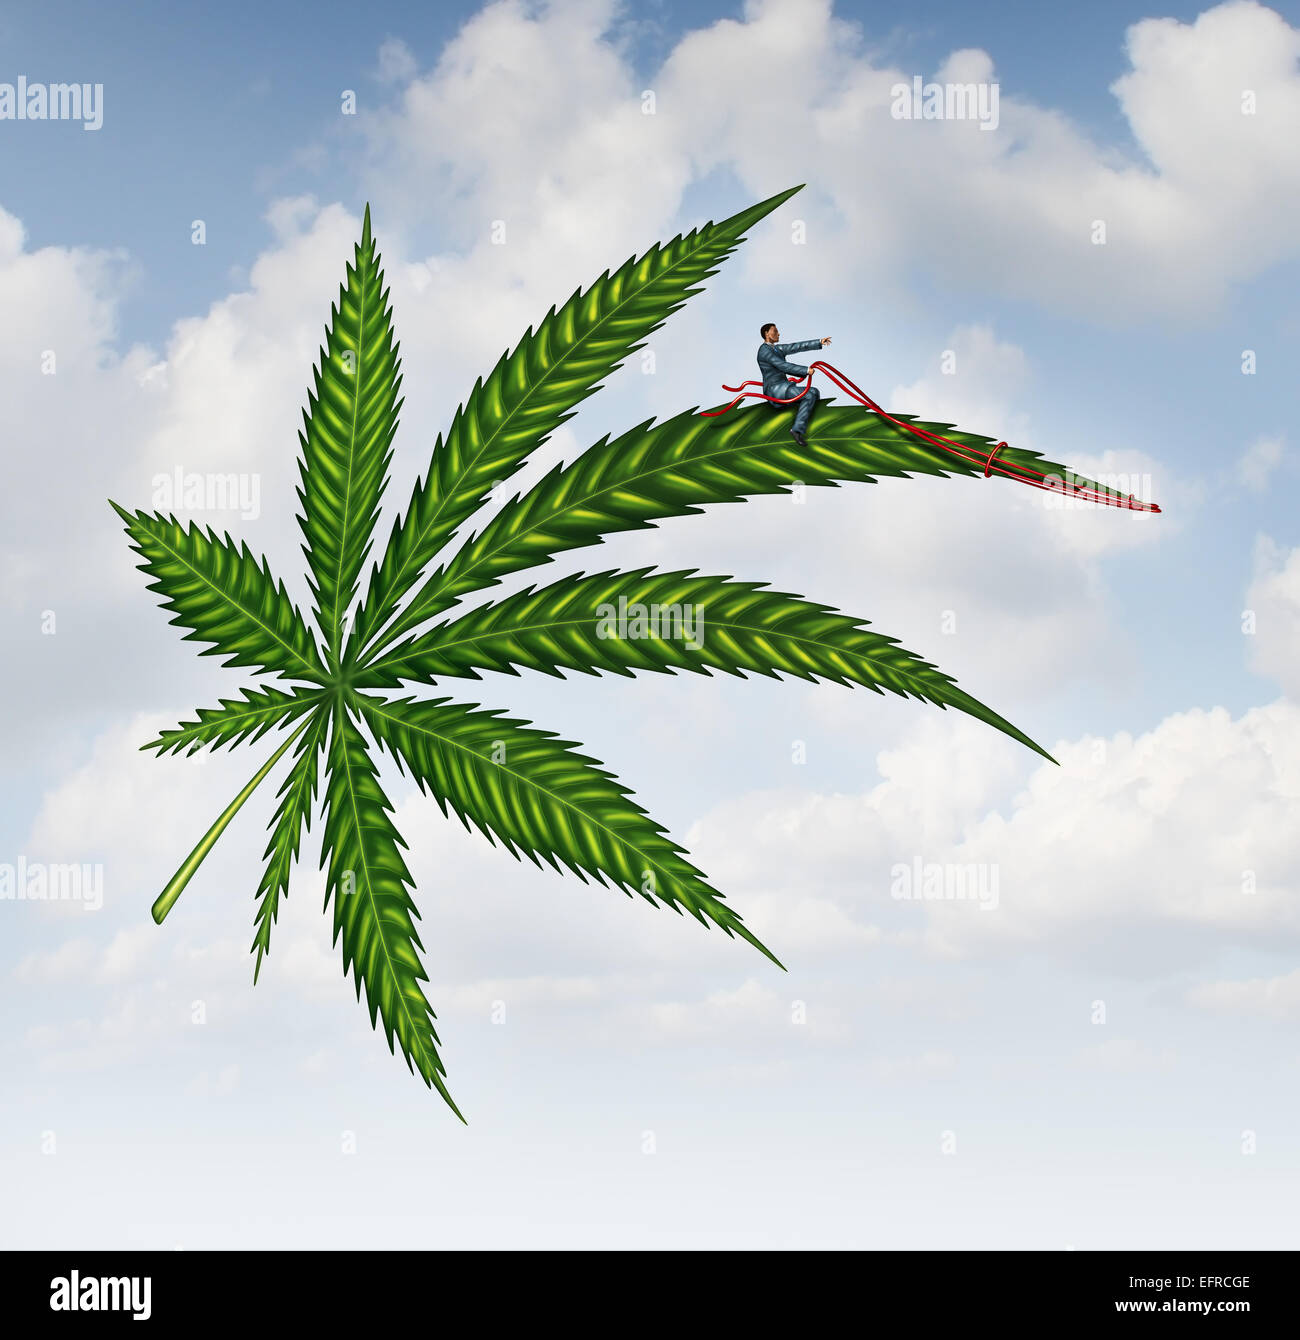 Marijuana concept and cannabis leaf flying high with a person guiding the medicinal plant as a symbol for the social issues of recreational drugs.. Stock Photo